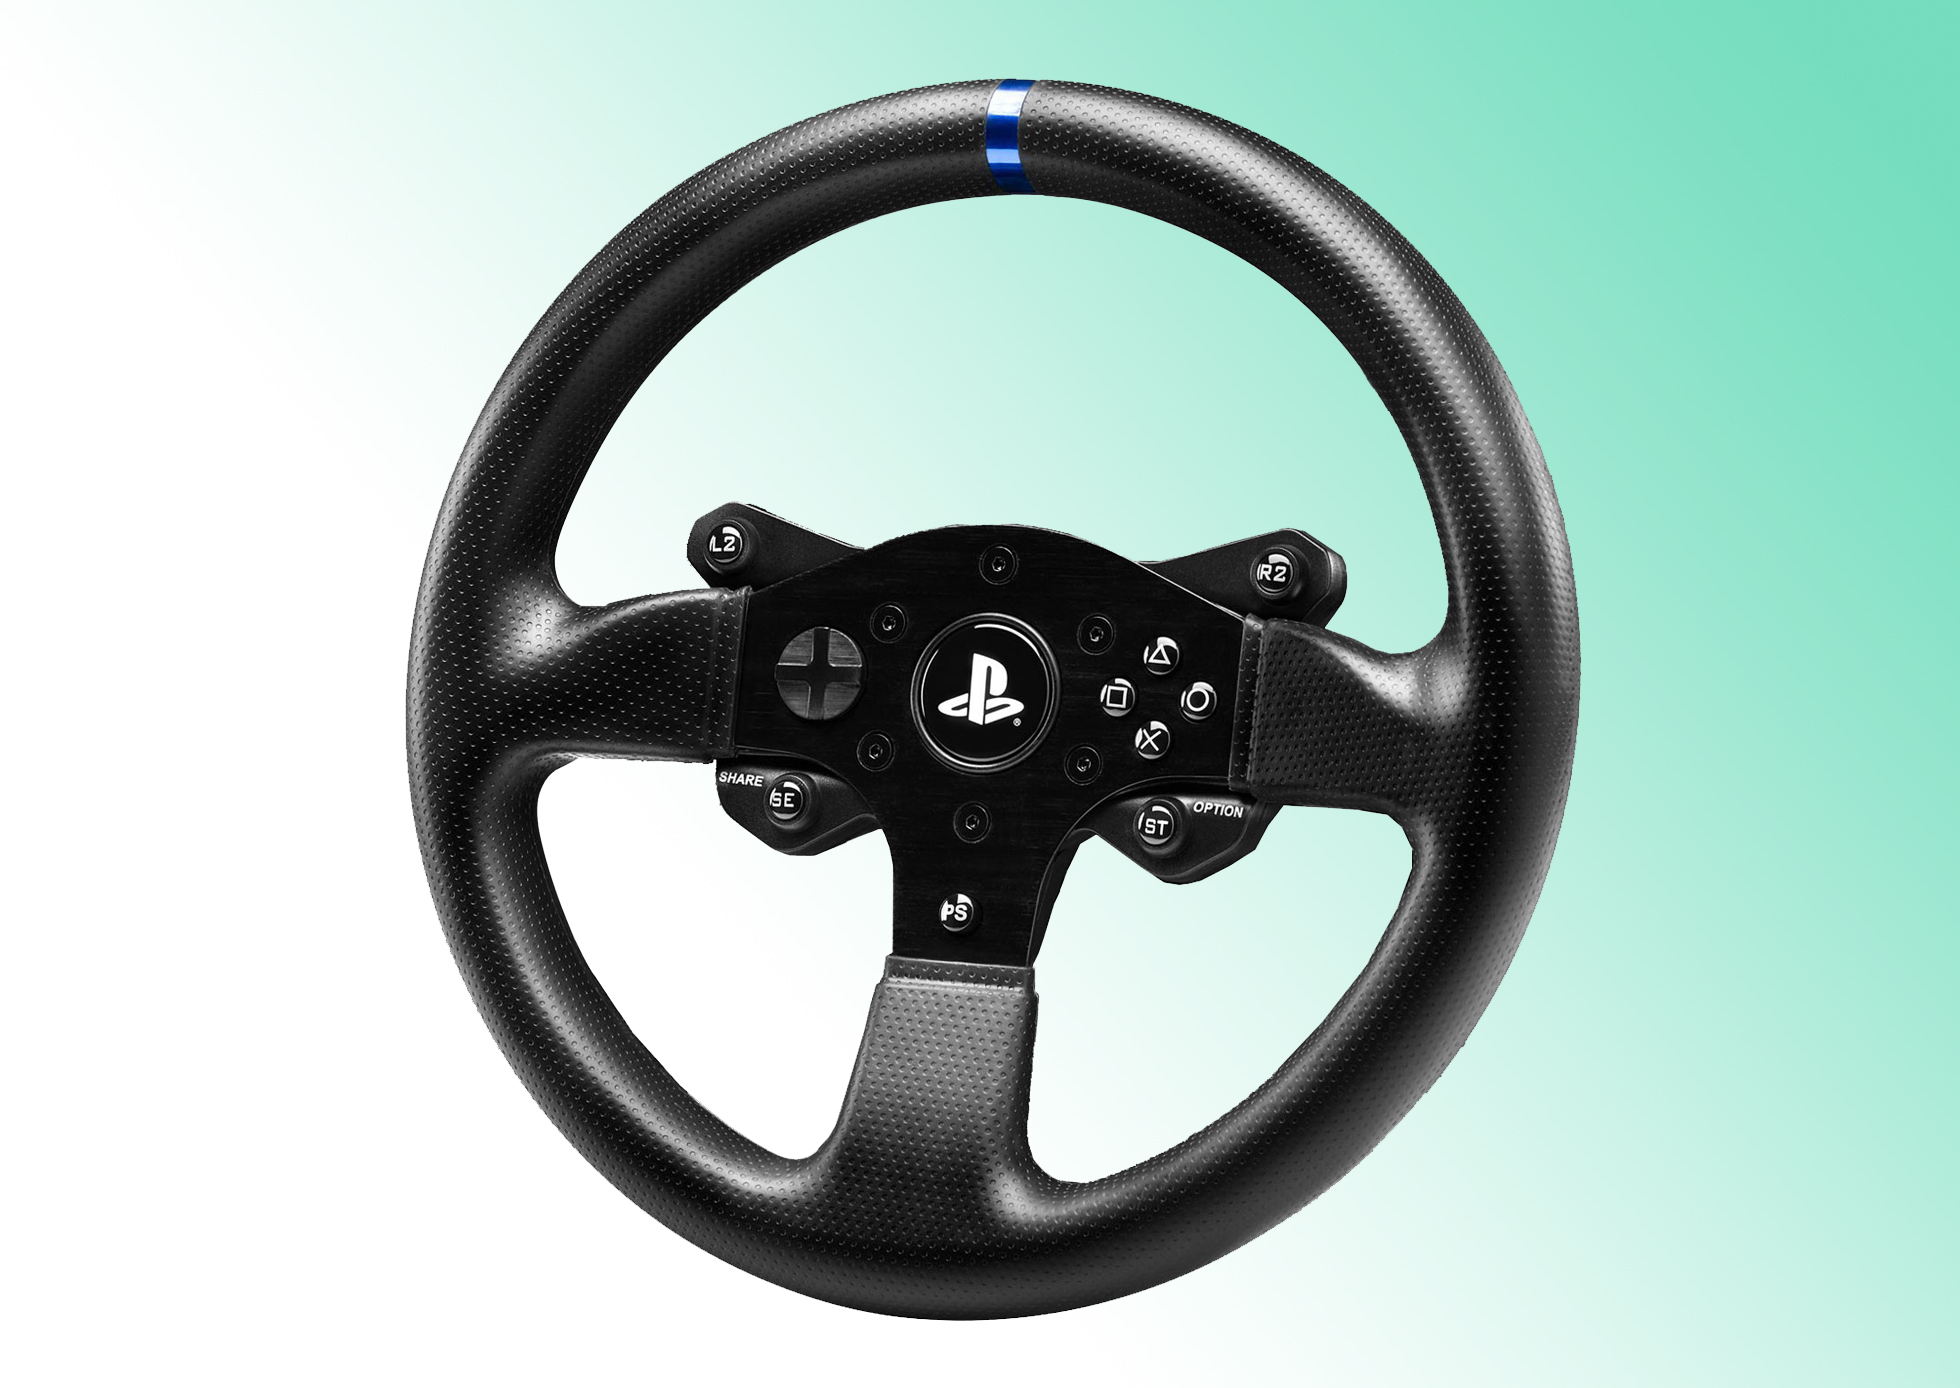 Test and Reviews of the Thrustmaster T300 RS steering wheel